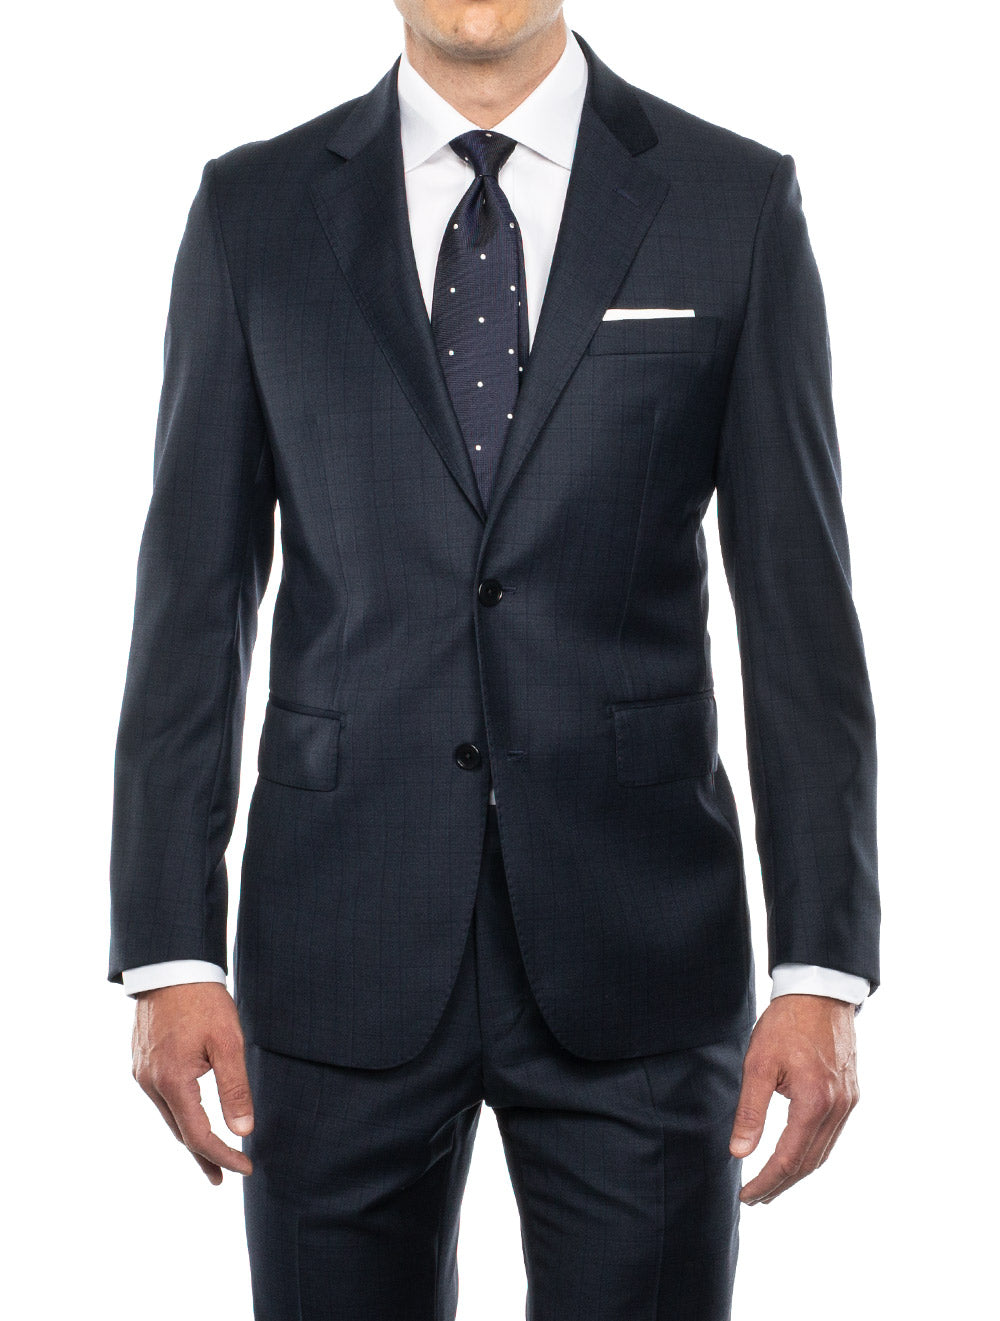 Heritage Collection Check Grey Suit Blue